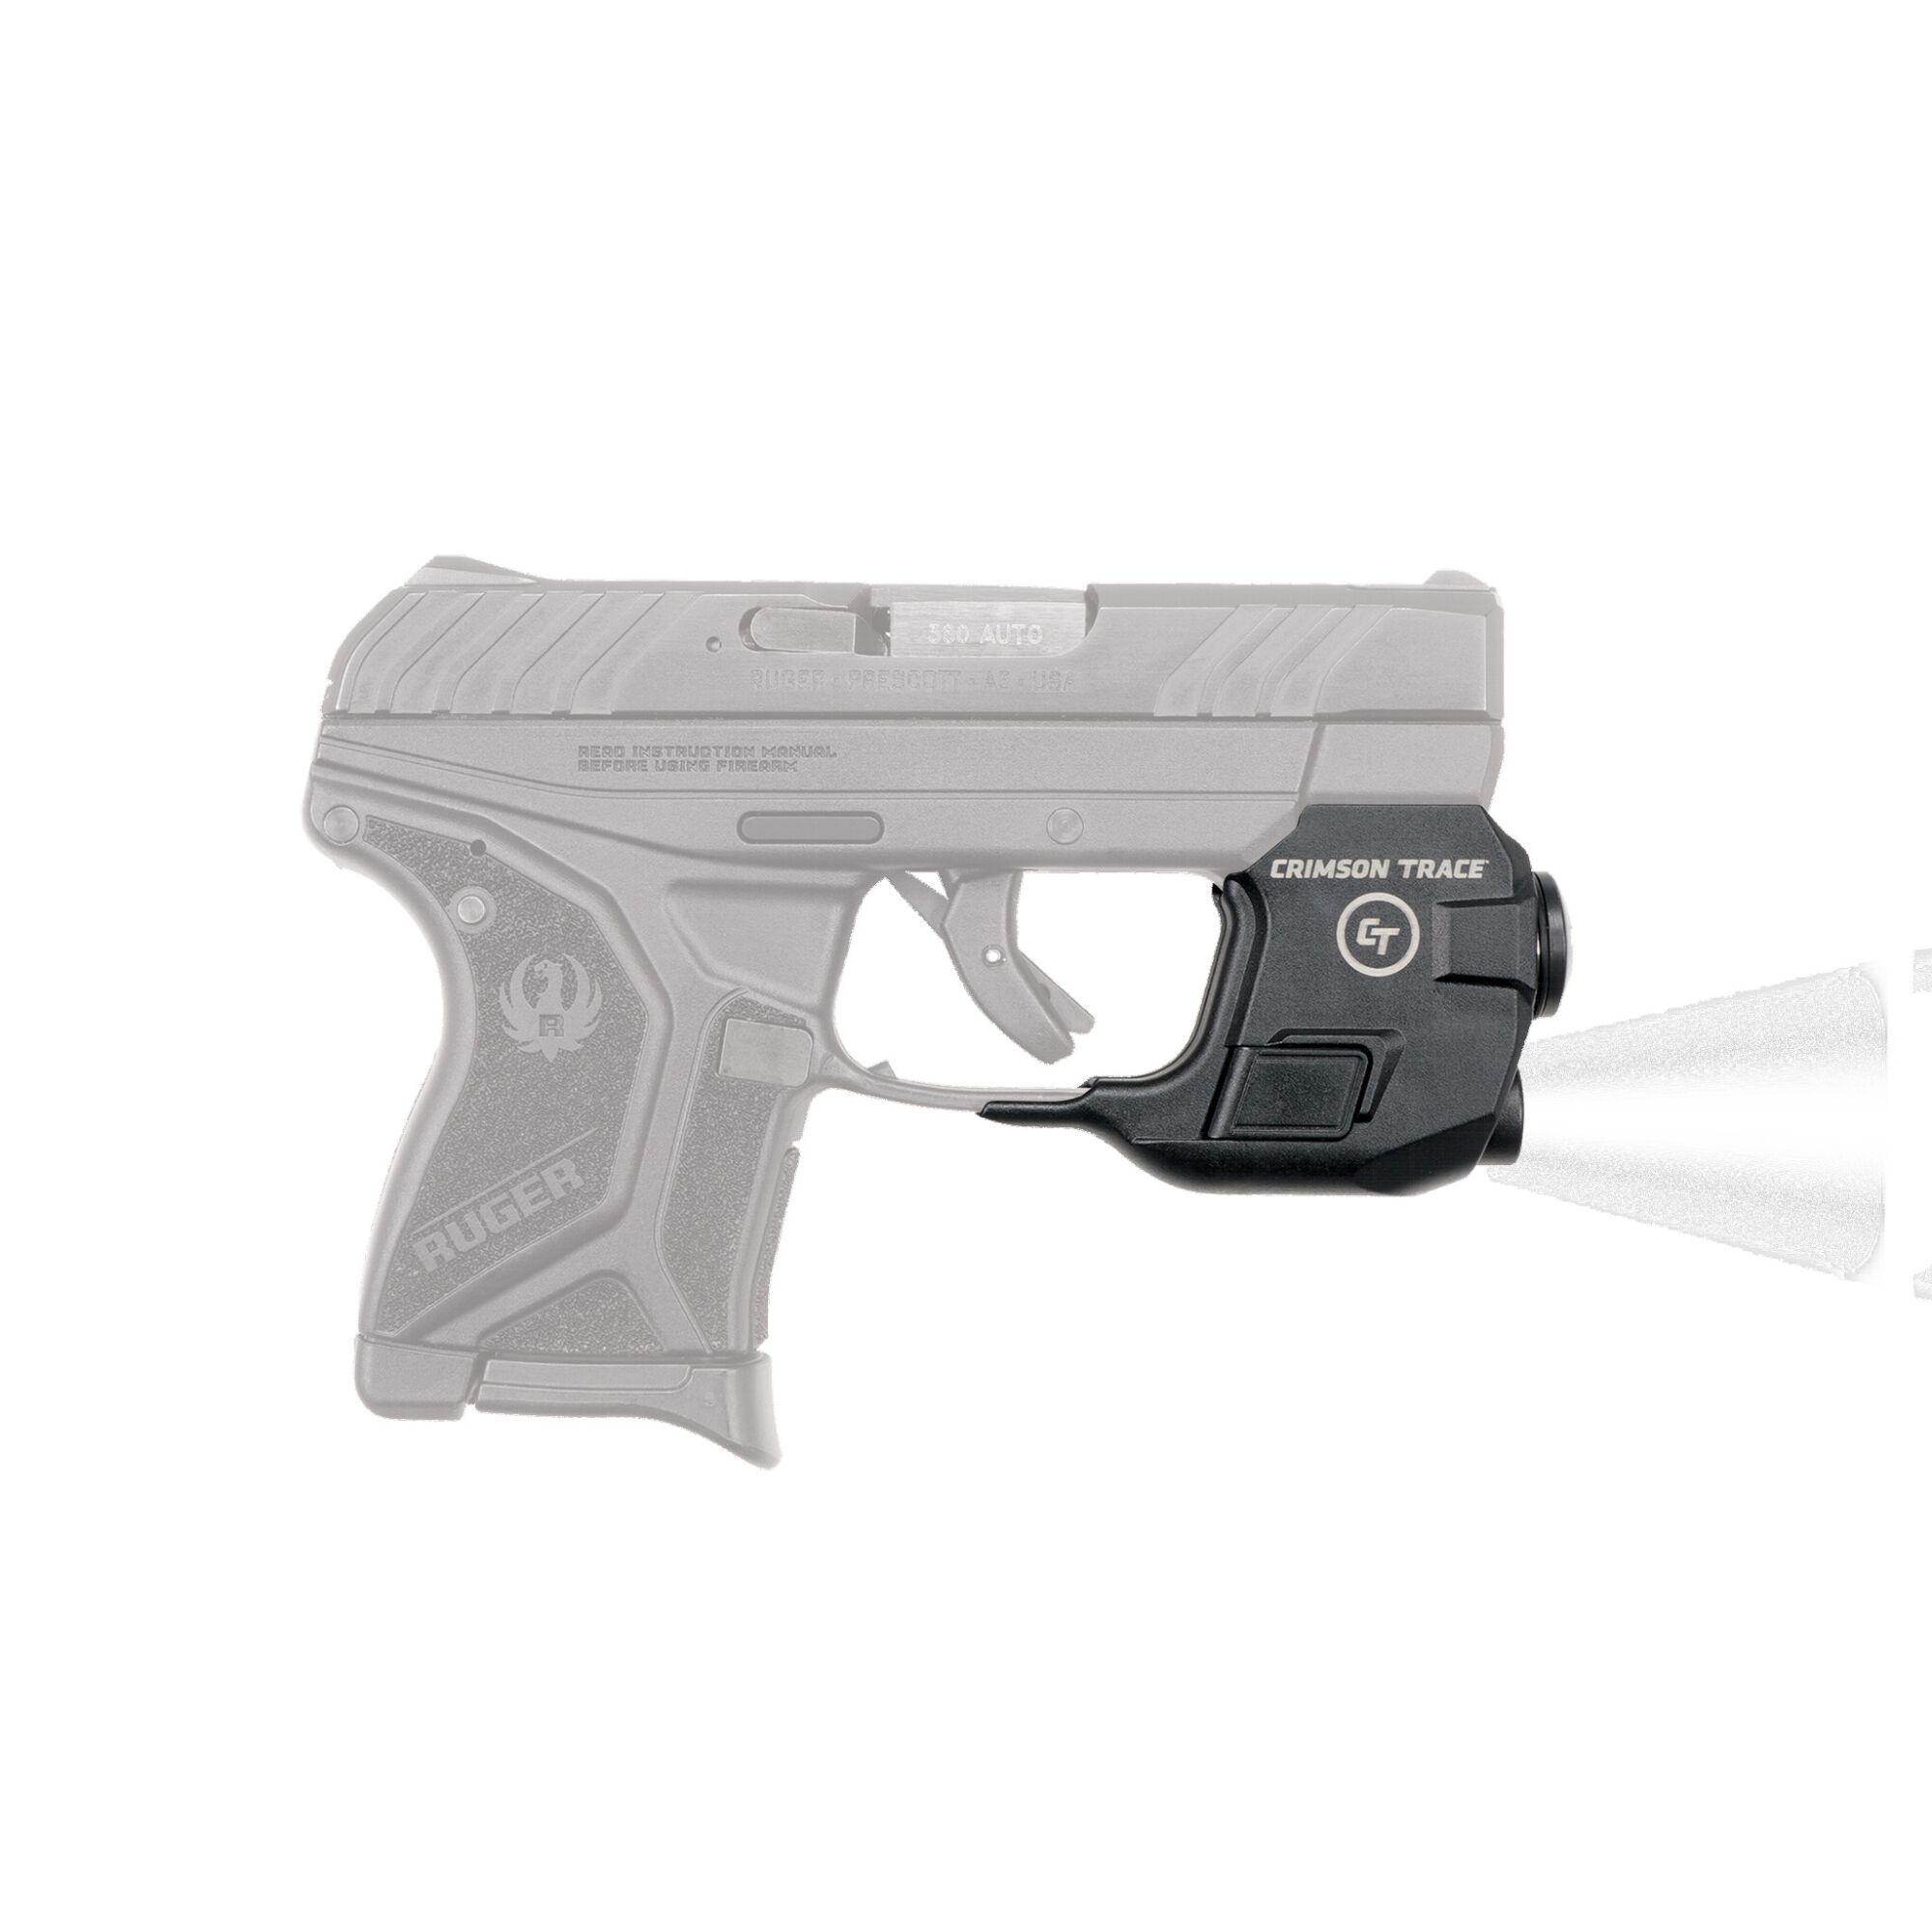 Crimson Trace LG-497G Green Laserguard for Ruger LCP II for sale online 